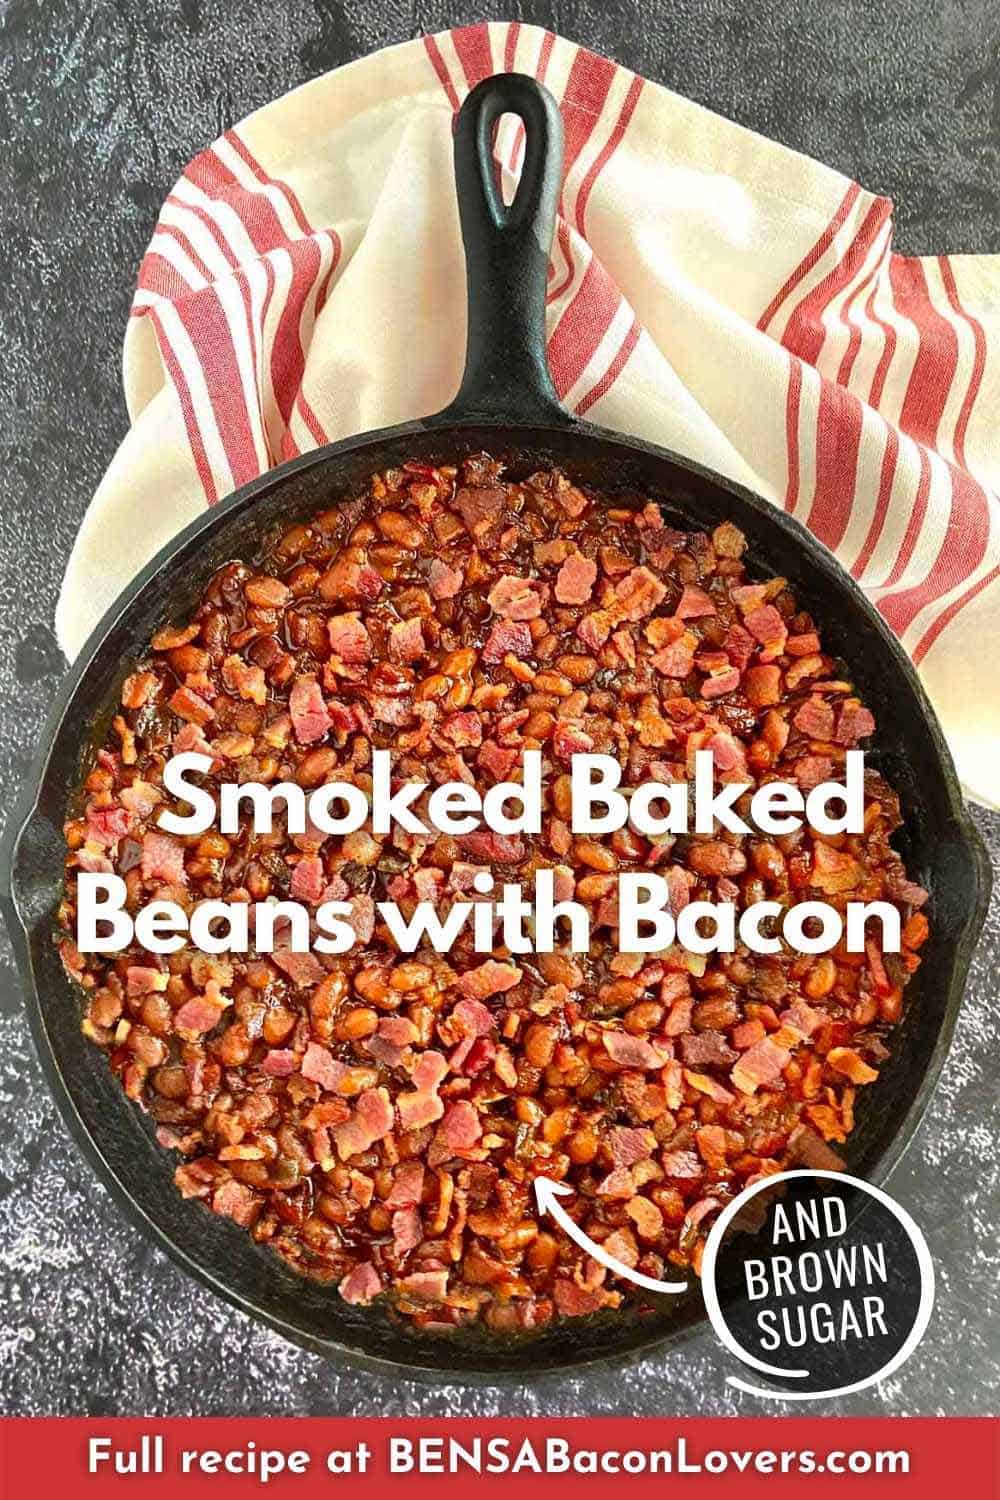 A finished skillet of smoked baked beans with bacon.